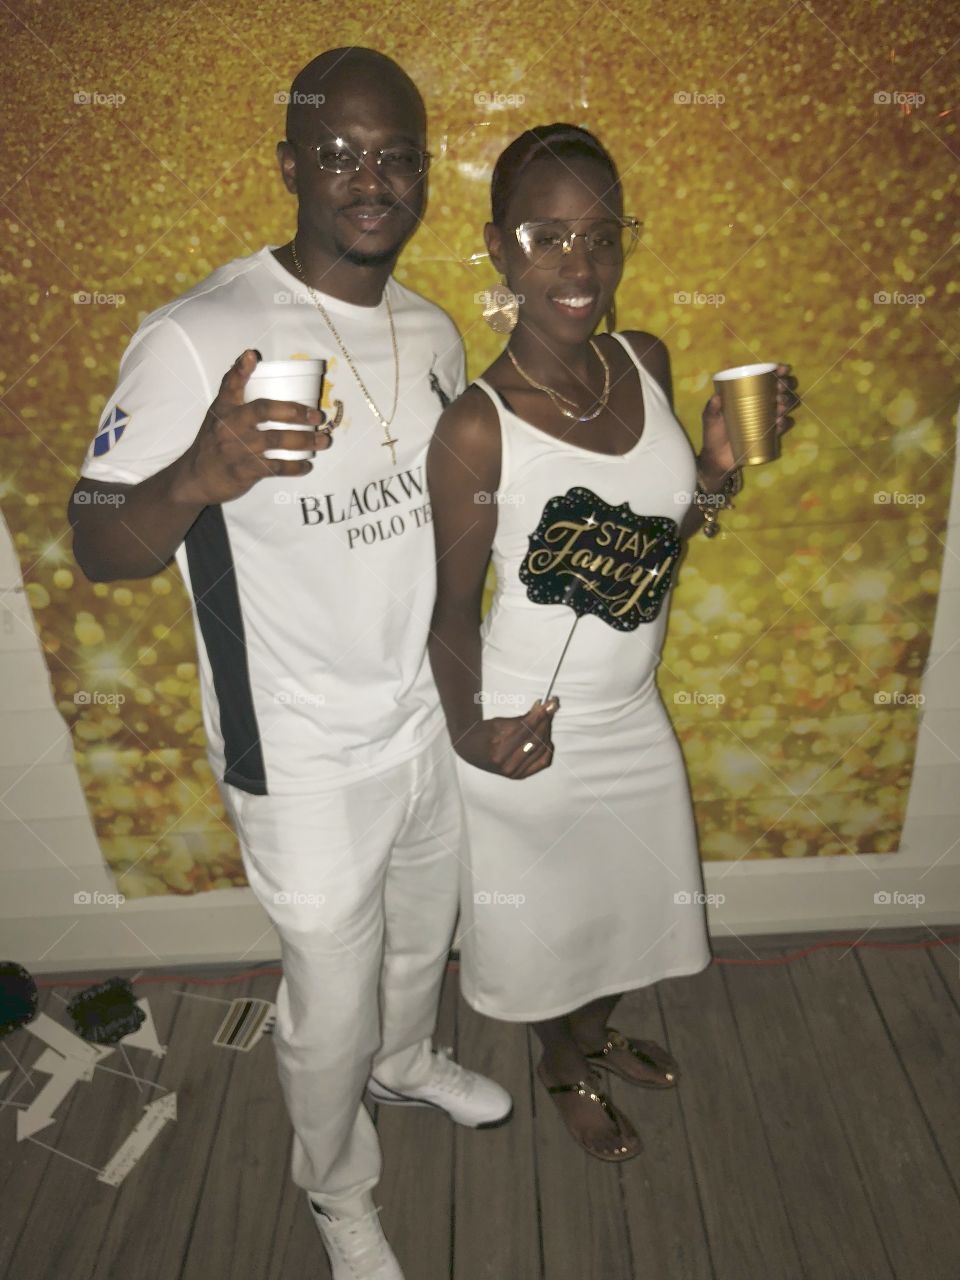 All white party